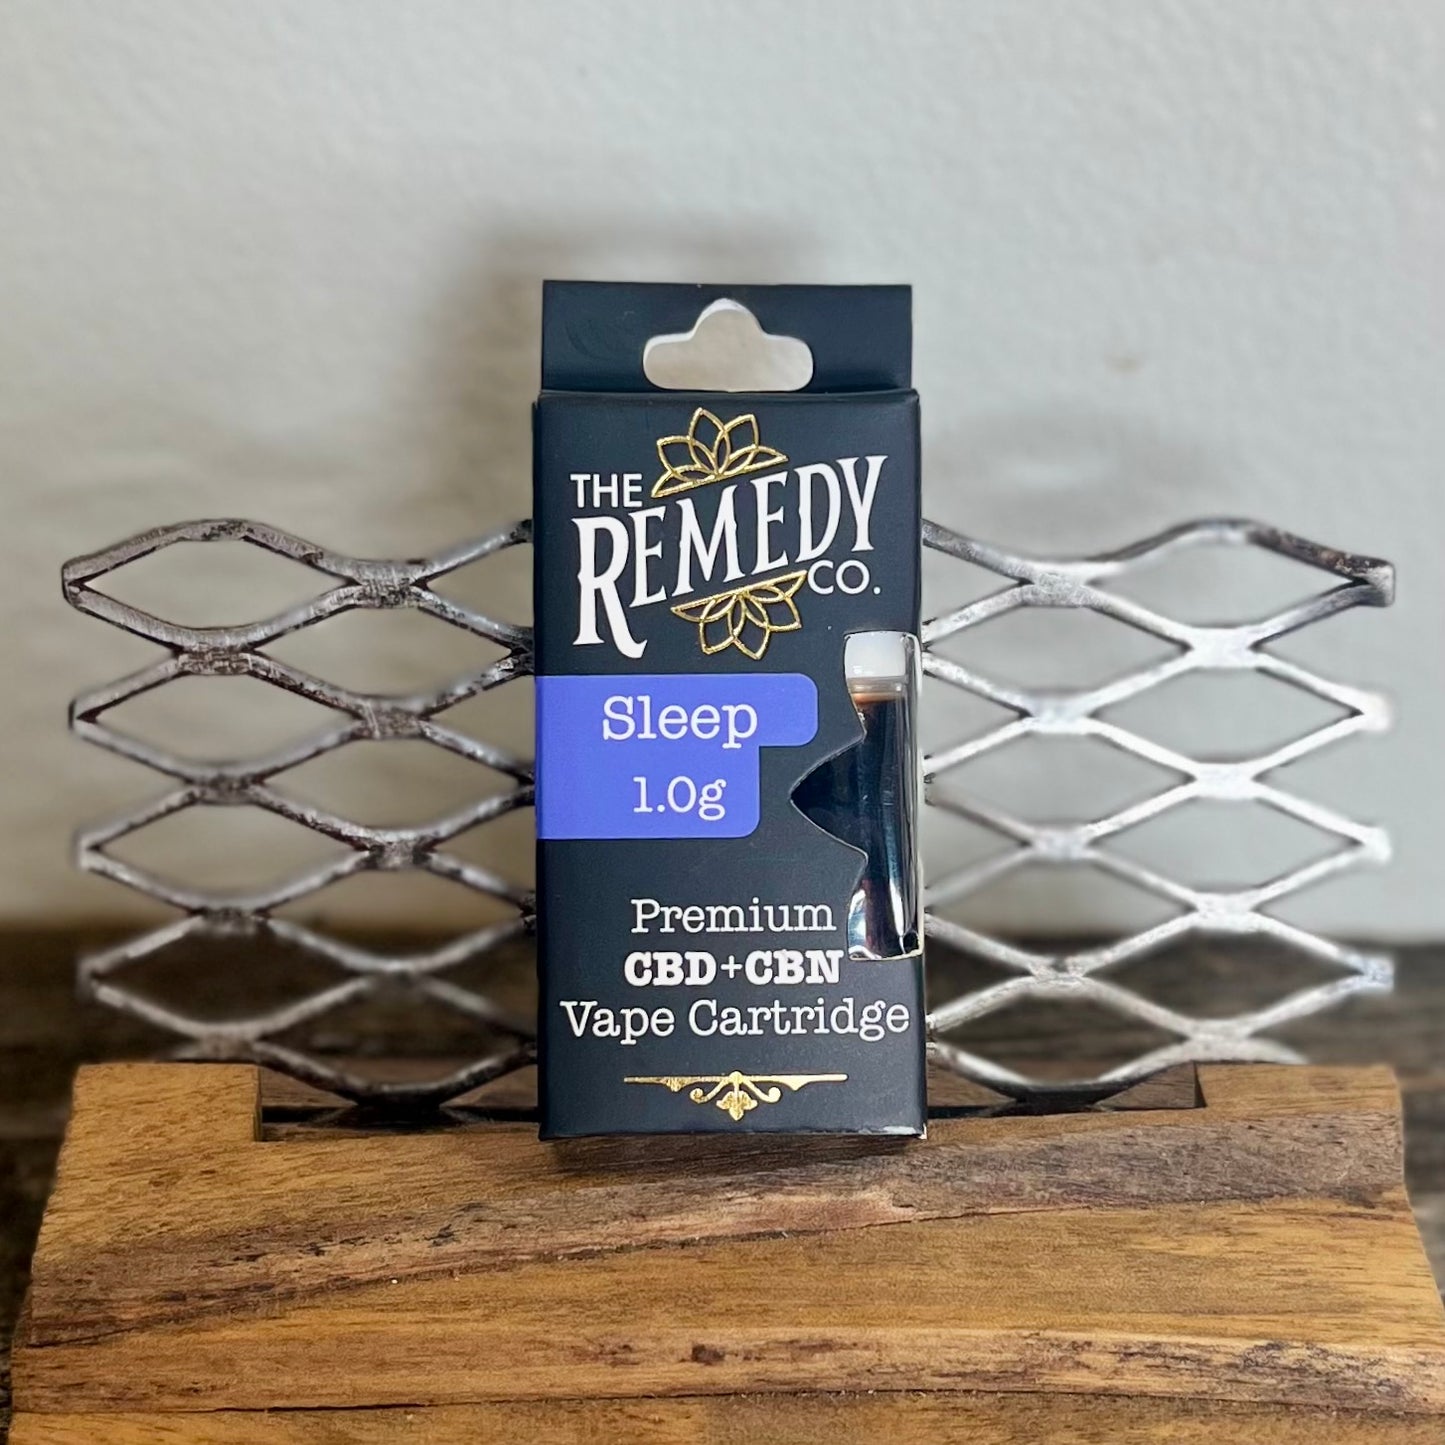 Specialty Vape Cartridges - The Remedy Co.